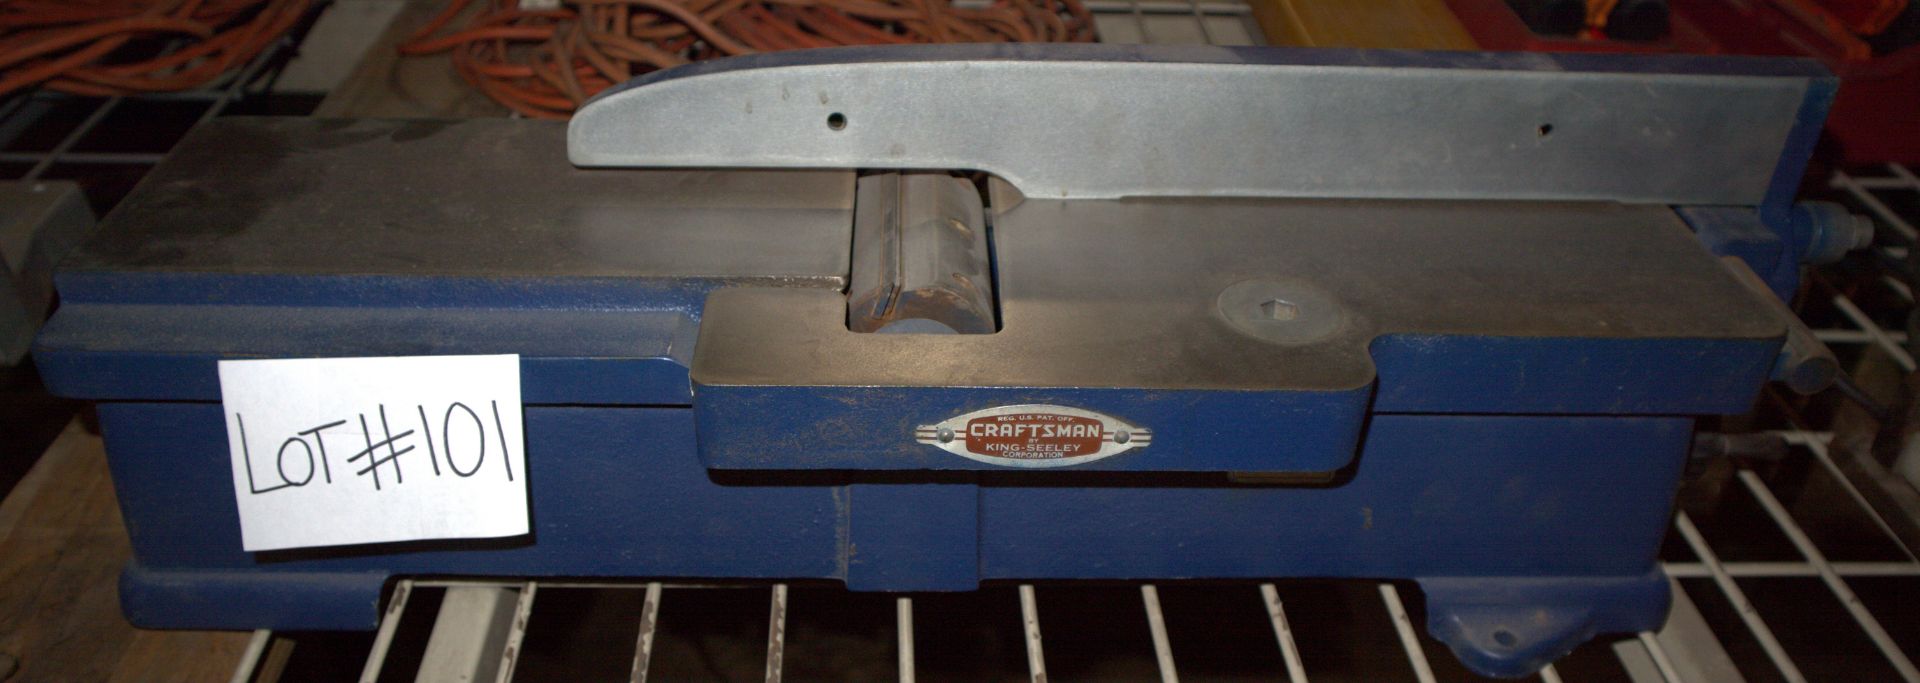 Sears Craftsman 4"Jointer - Image 2 of 2